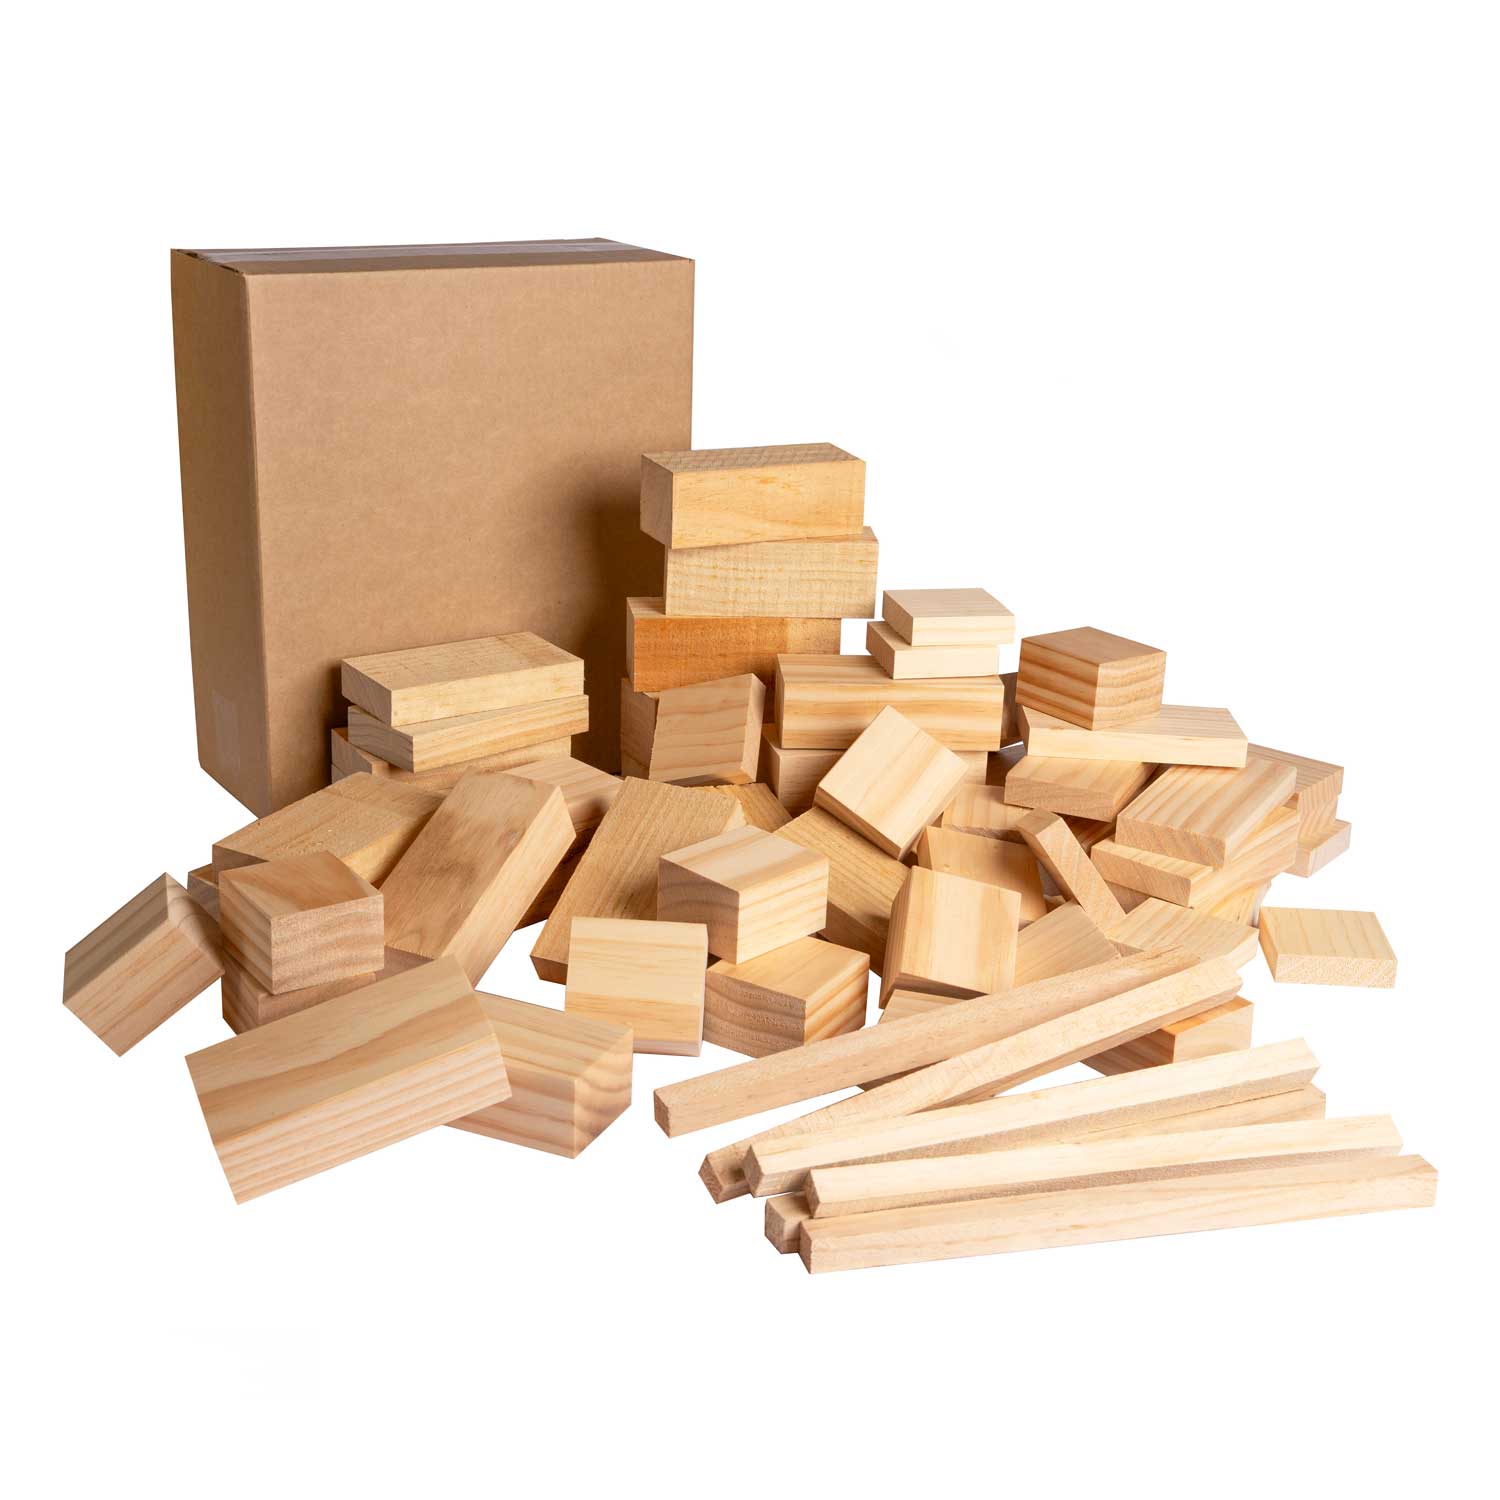 Box of Untreated Wood Blocks – Build With Me